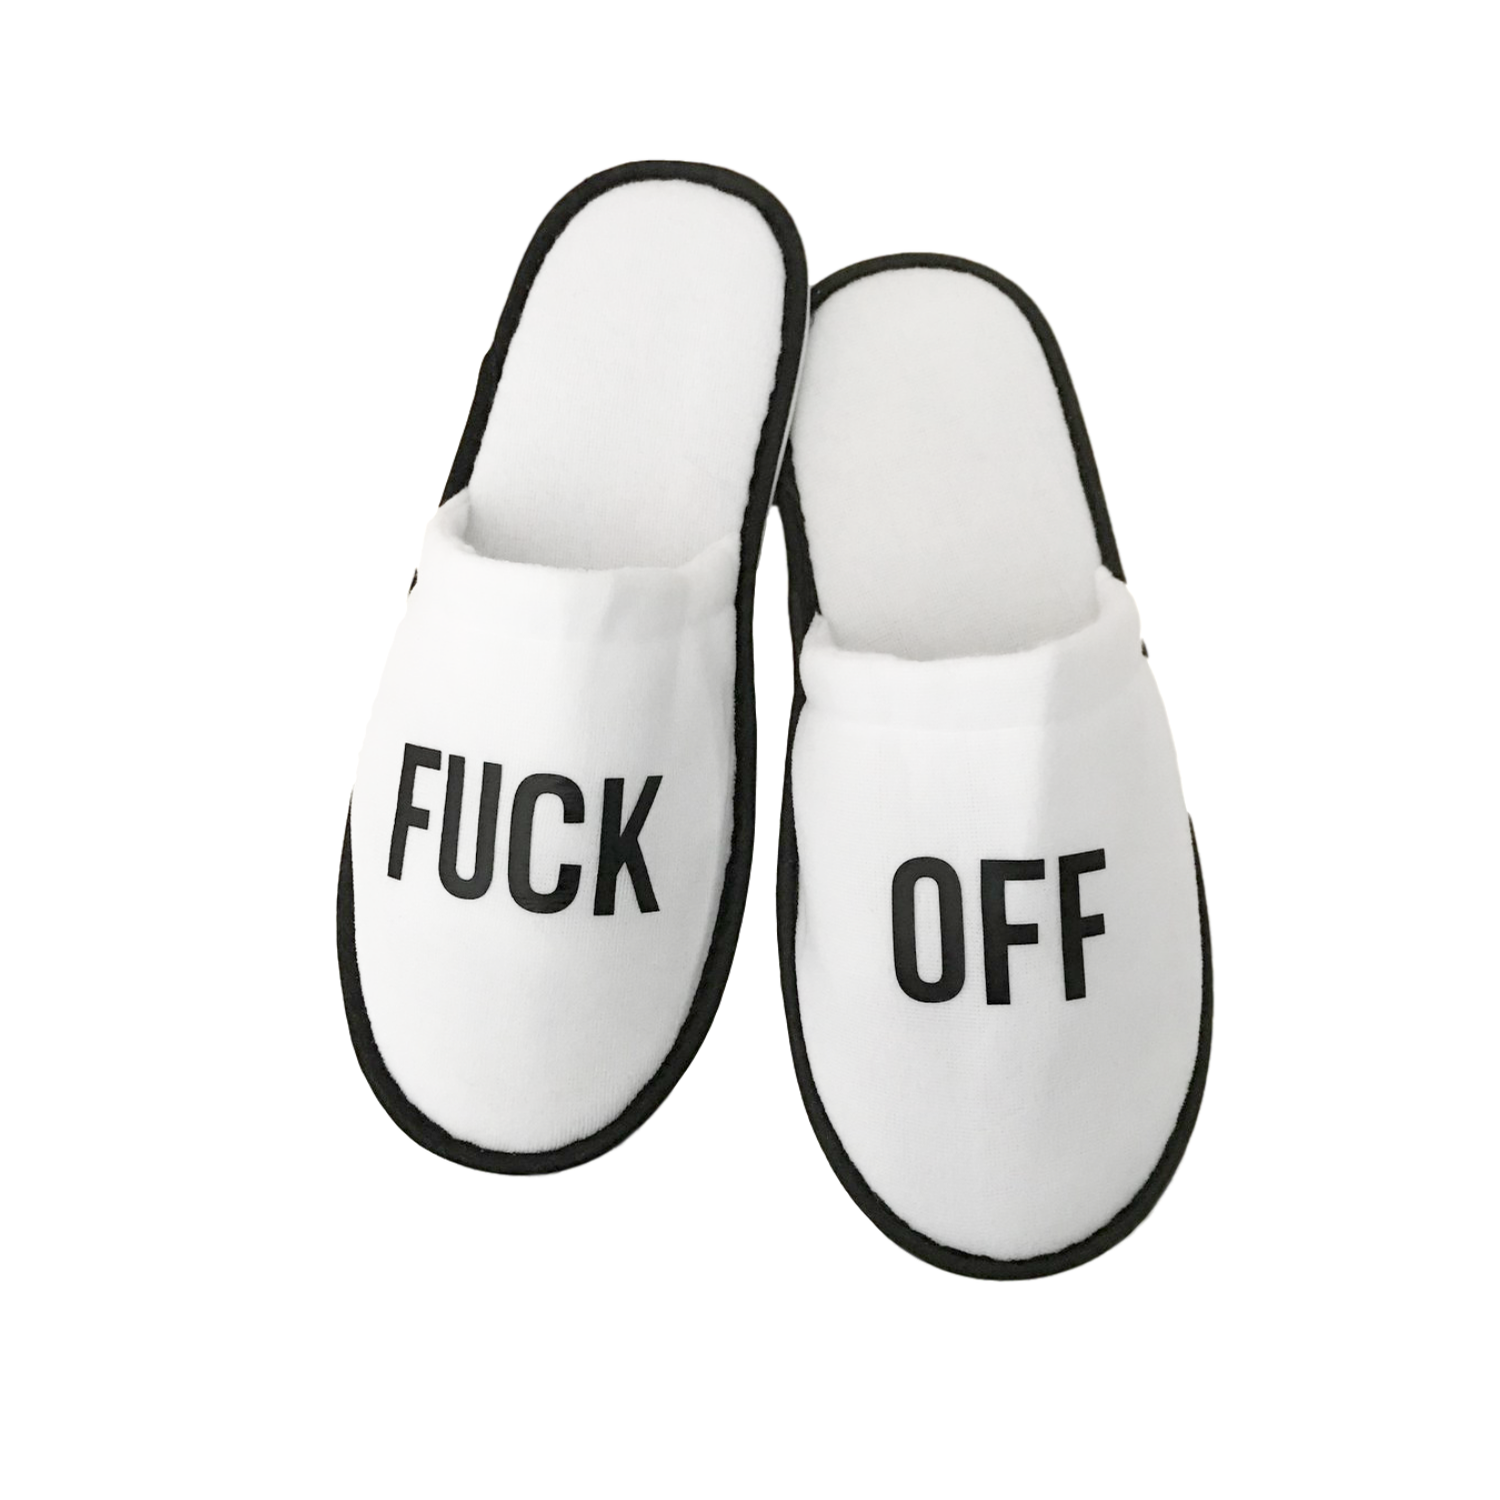 off slippers